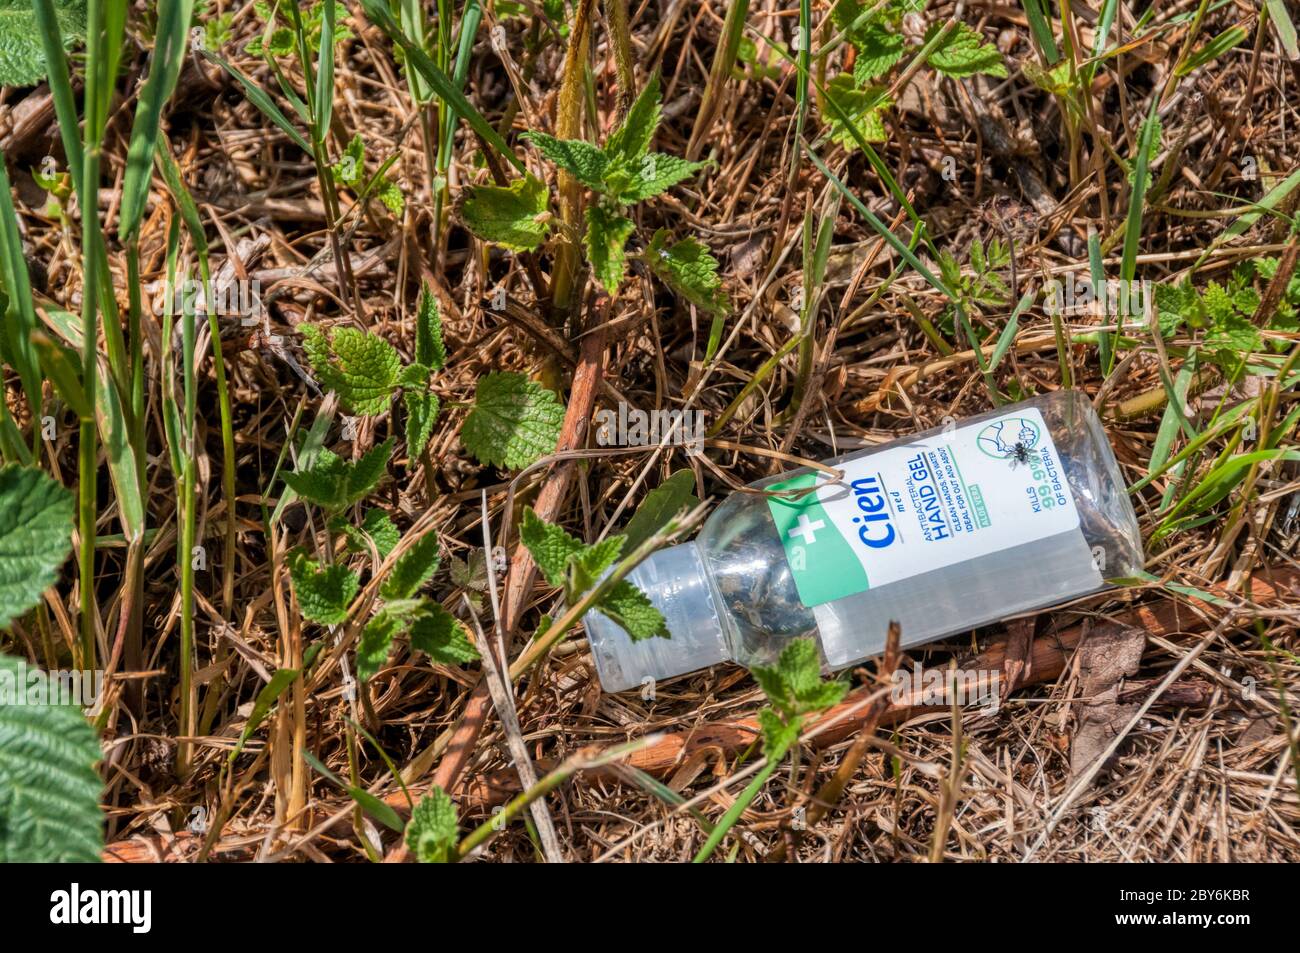 The new litter - an empty bottle of hand sanitiser thrown out on a roadside verge. Stock Photo